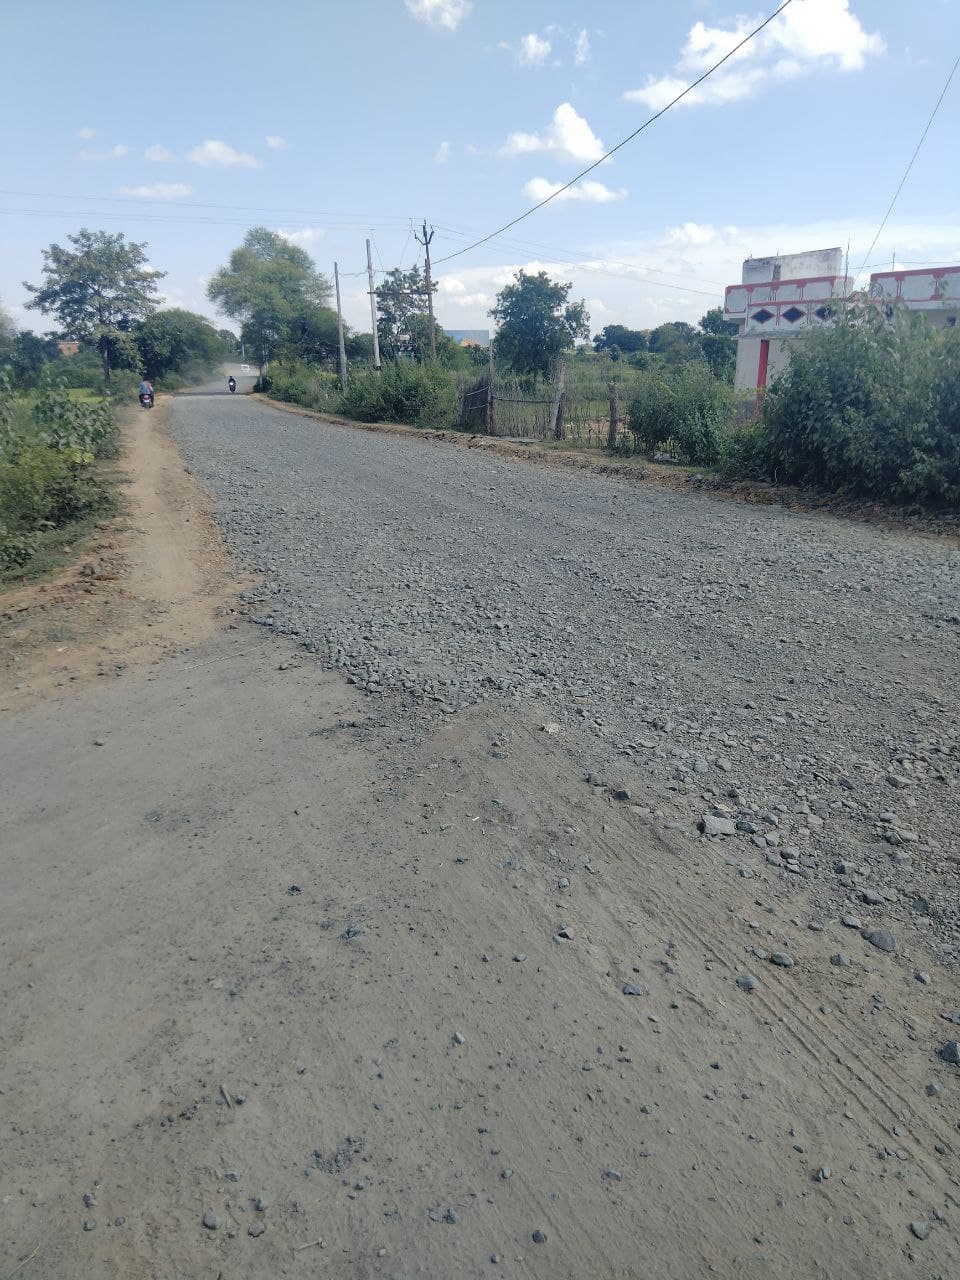 Panchayat built a road worth Rs 14 lakh, leaving the rural road and us